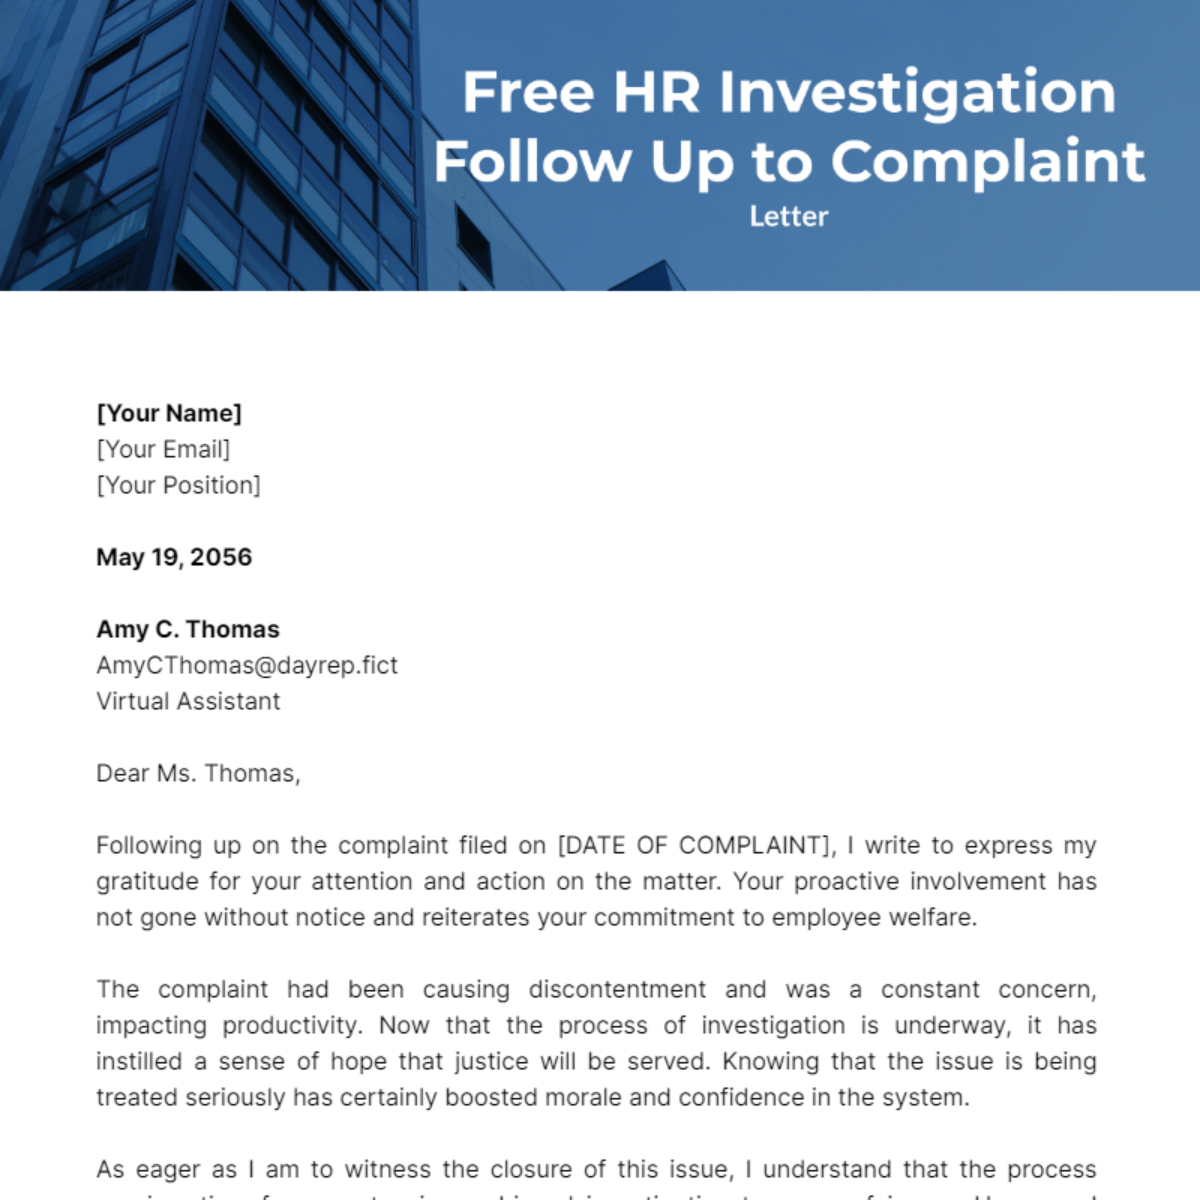 HR Investigation Follow Up Letter to Complaint Template